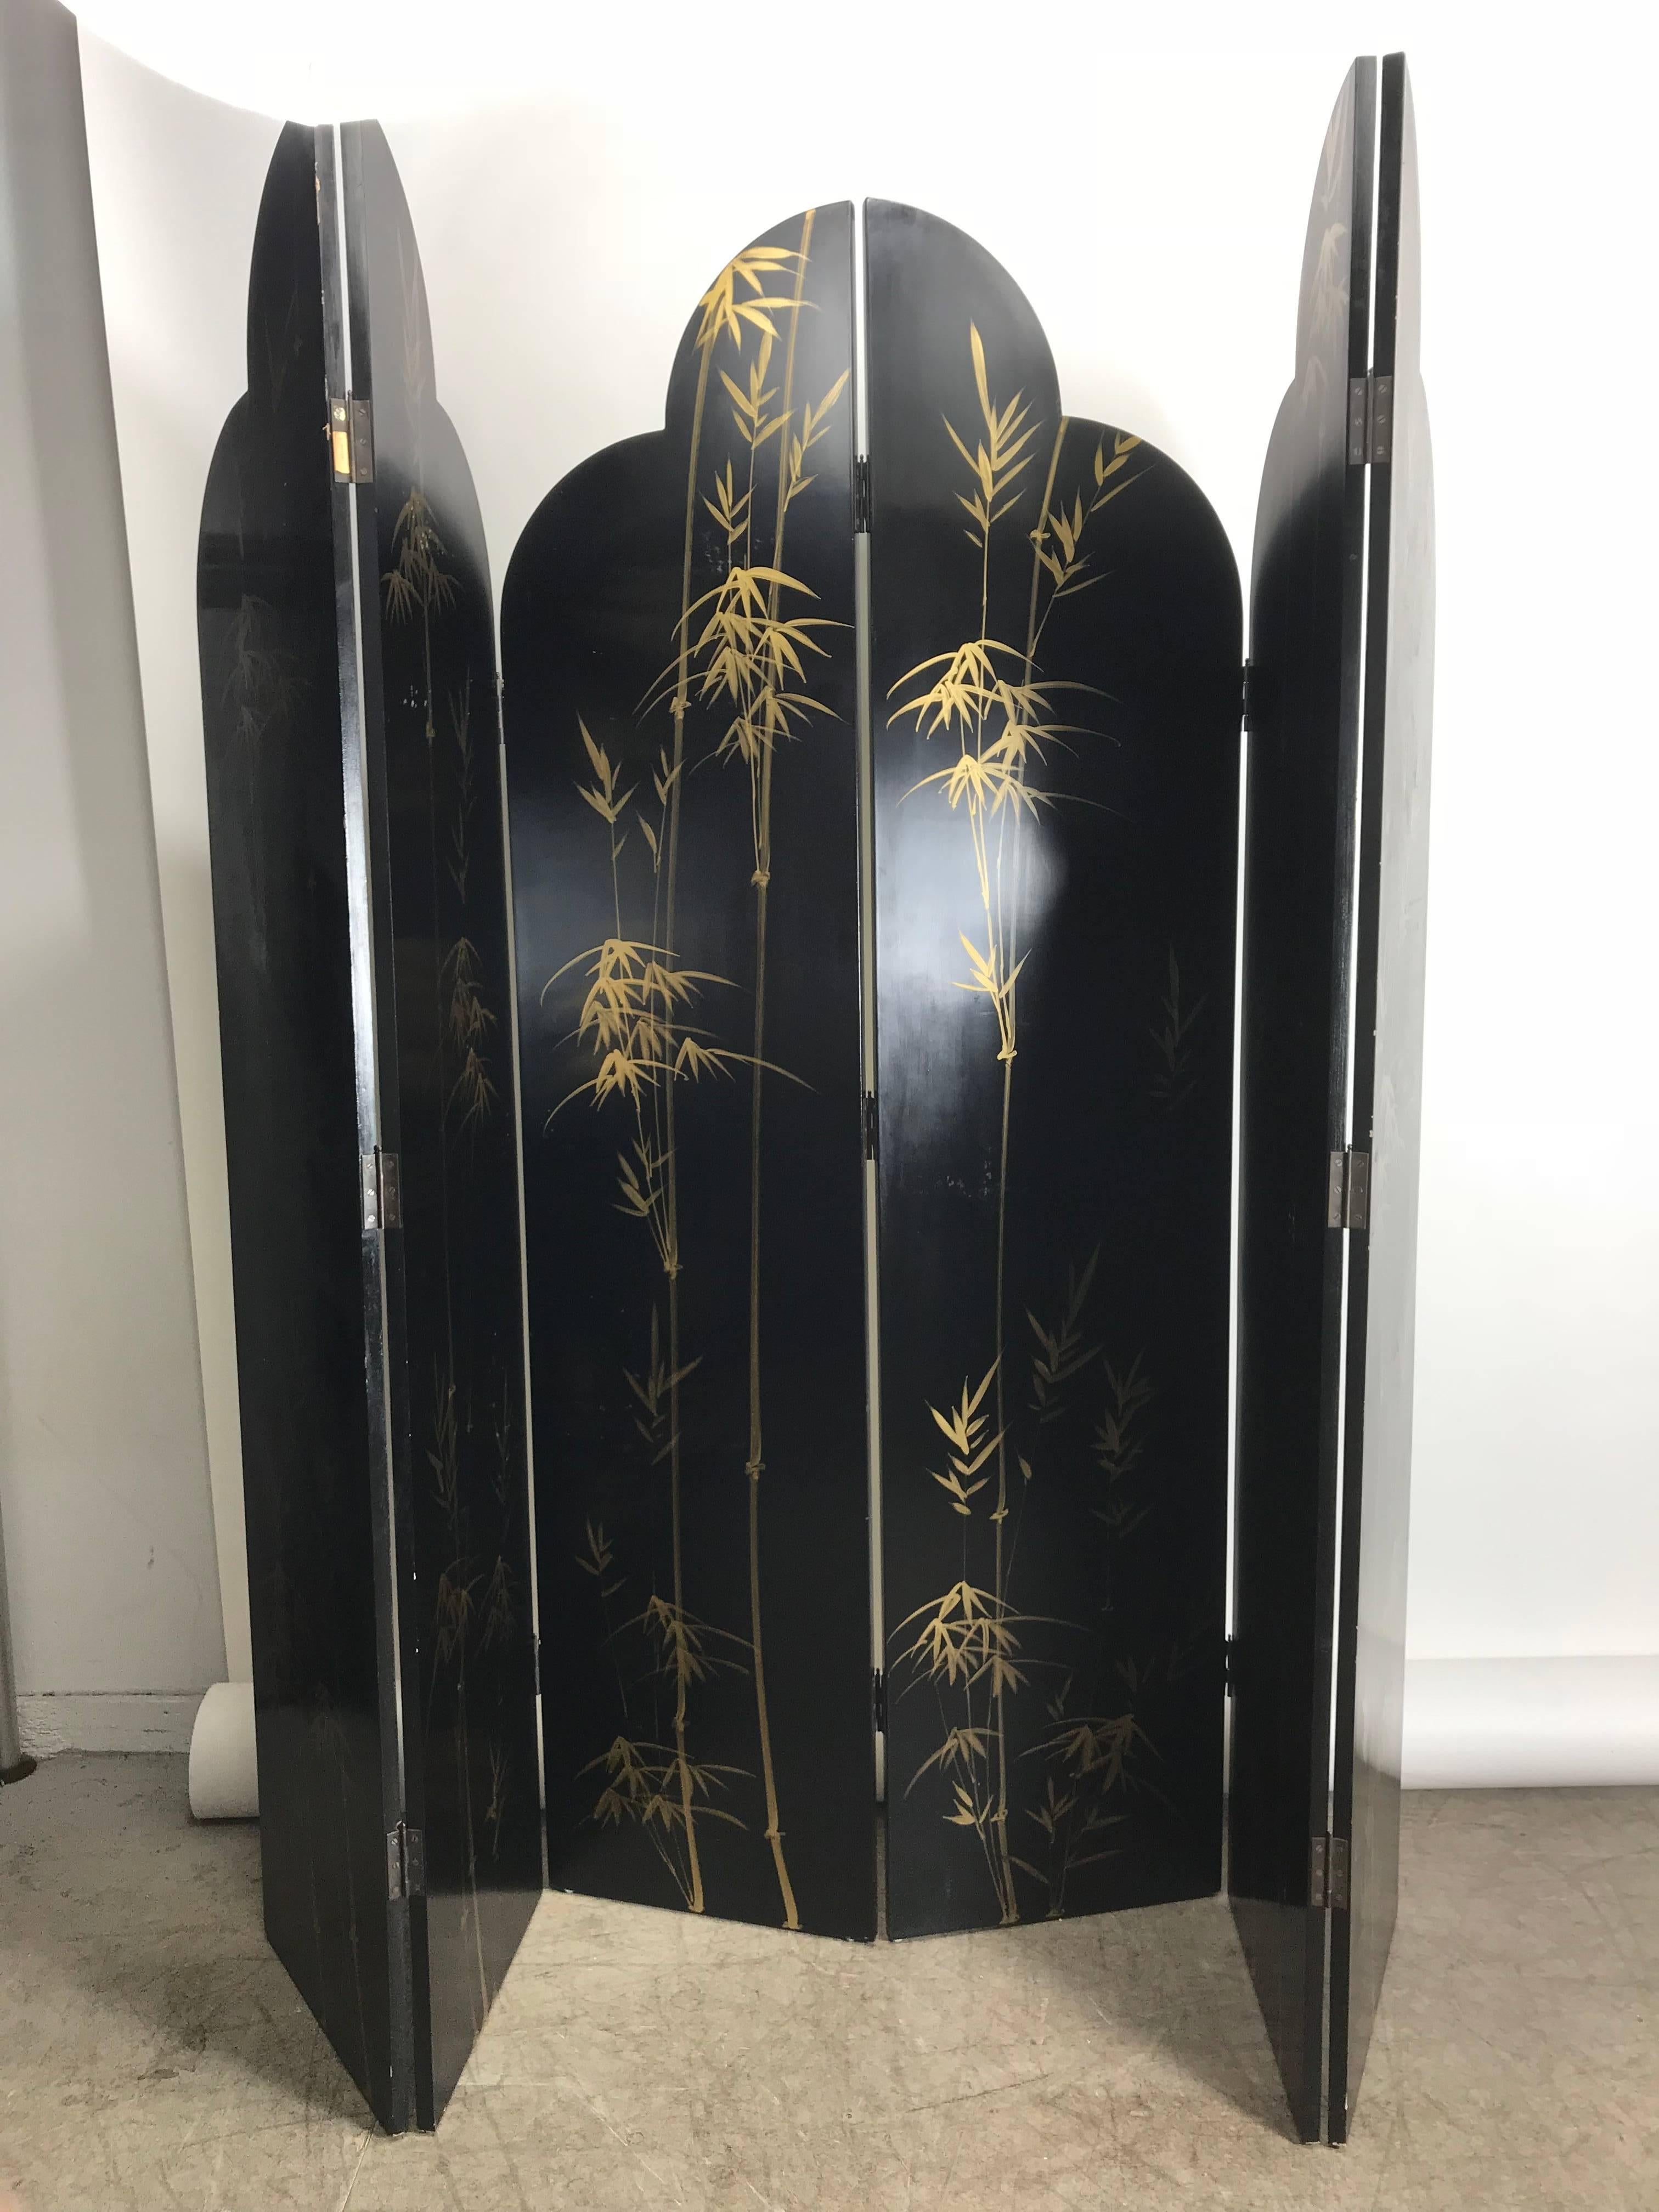 Outstanding six panel double-sided Asian screen or room divider, Art Deco lines featuring silver side with stunning crane motif, reverse side with classic black lacquer with gold wheat design. Each panel measures 18